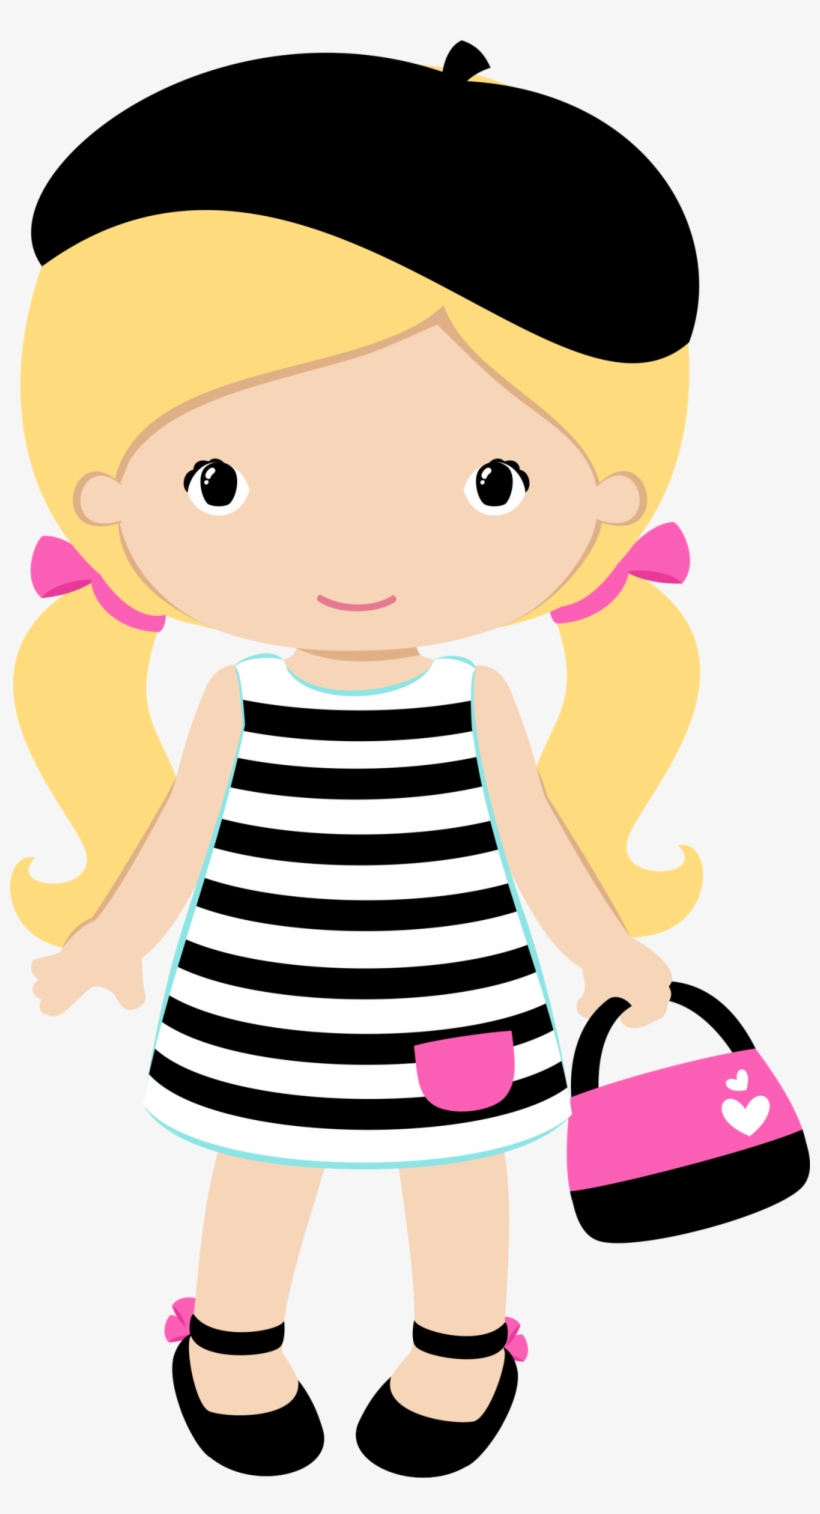 View All Images At Png Folder - Girl Clipart, transparent png #235981